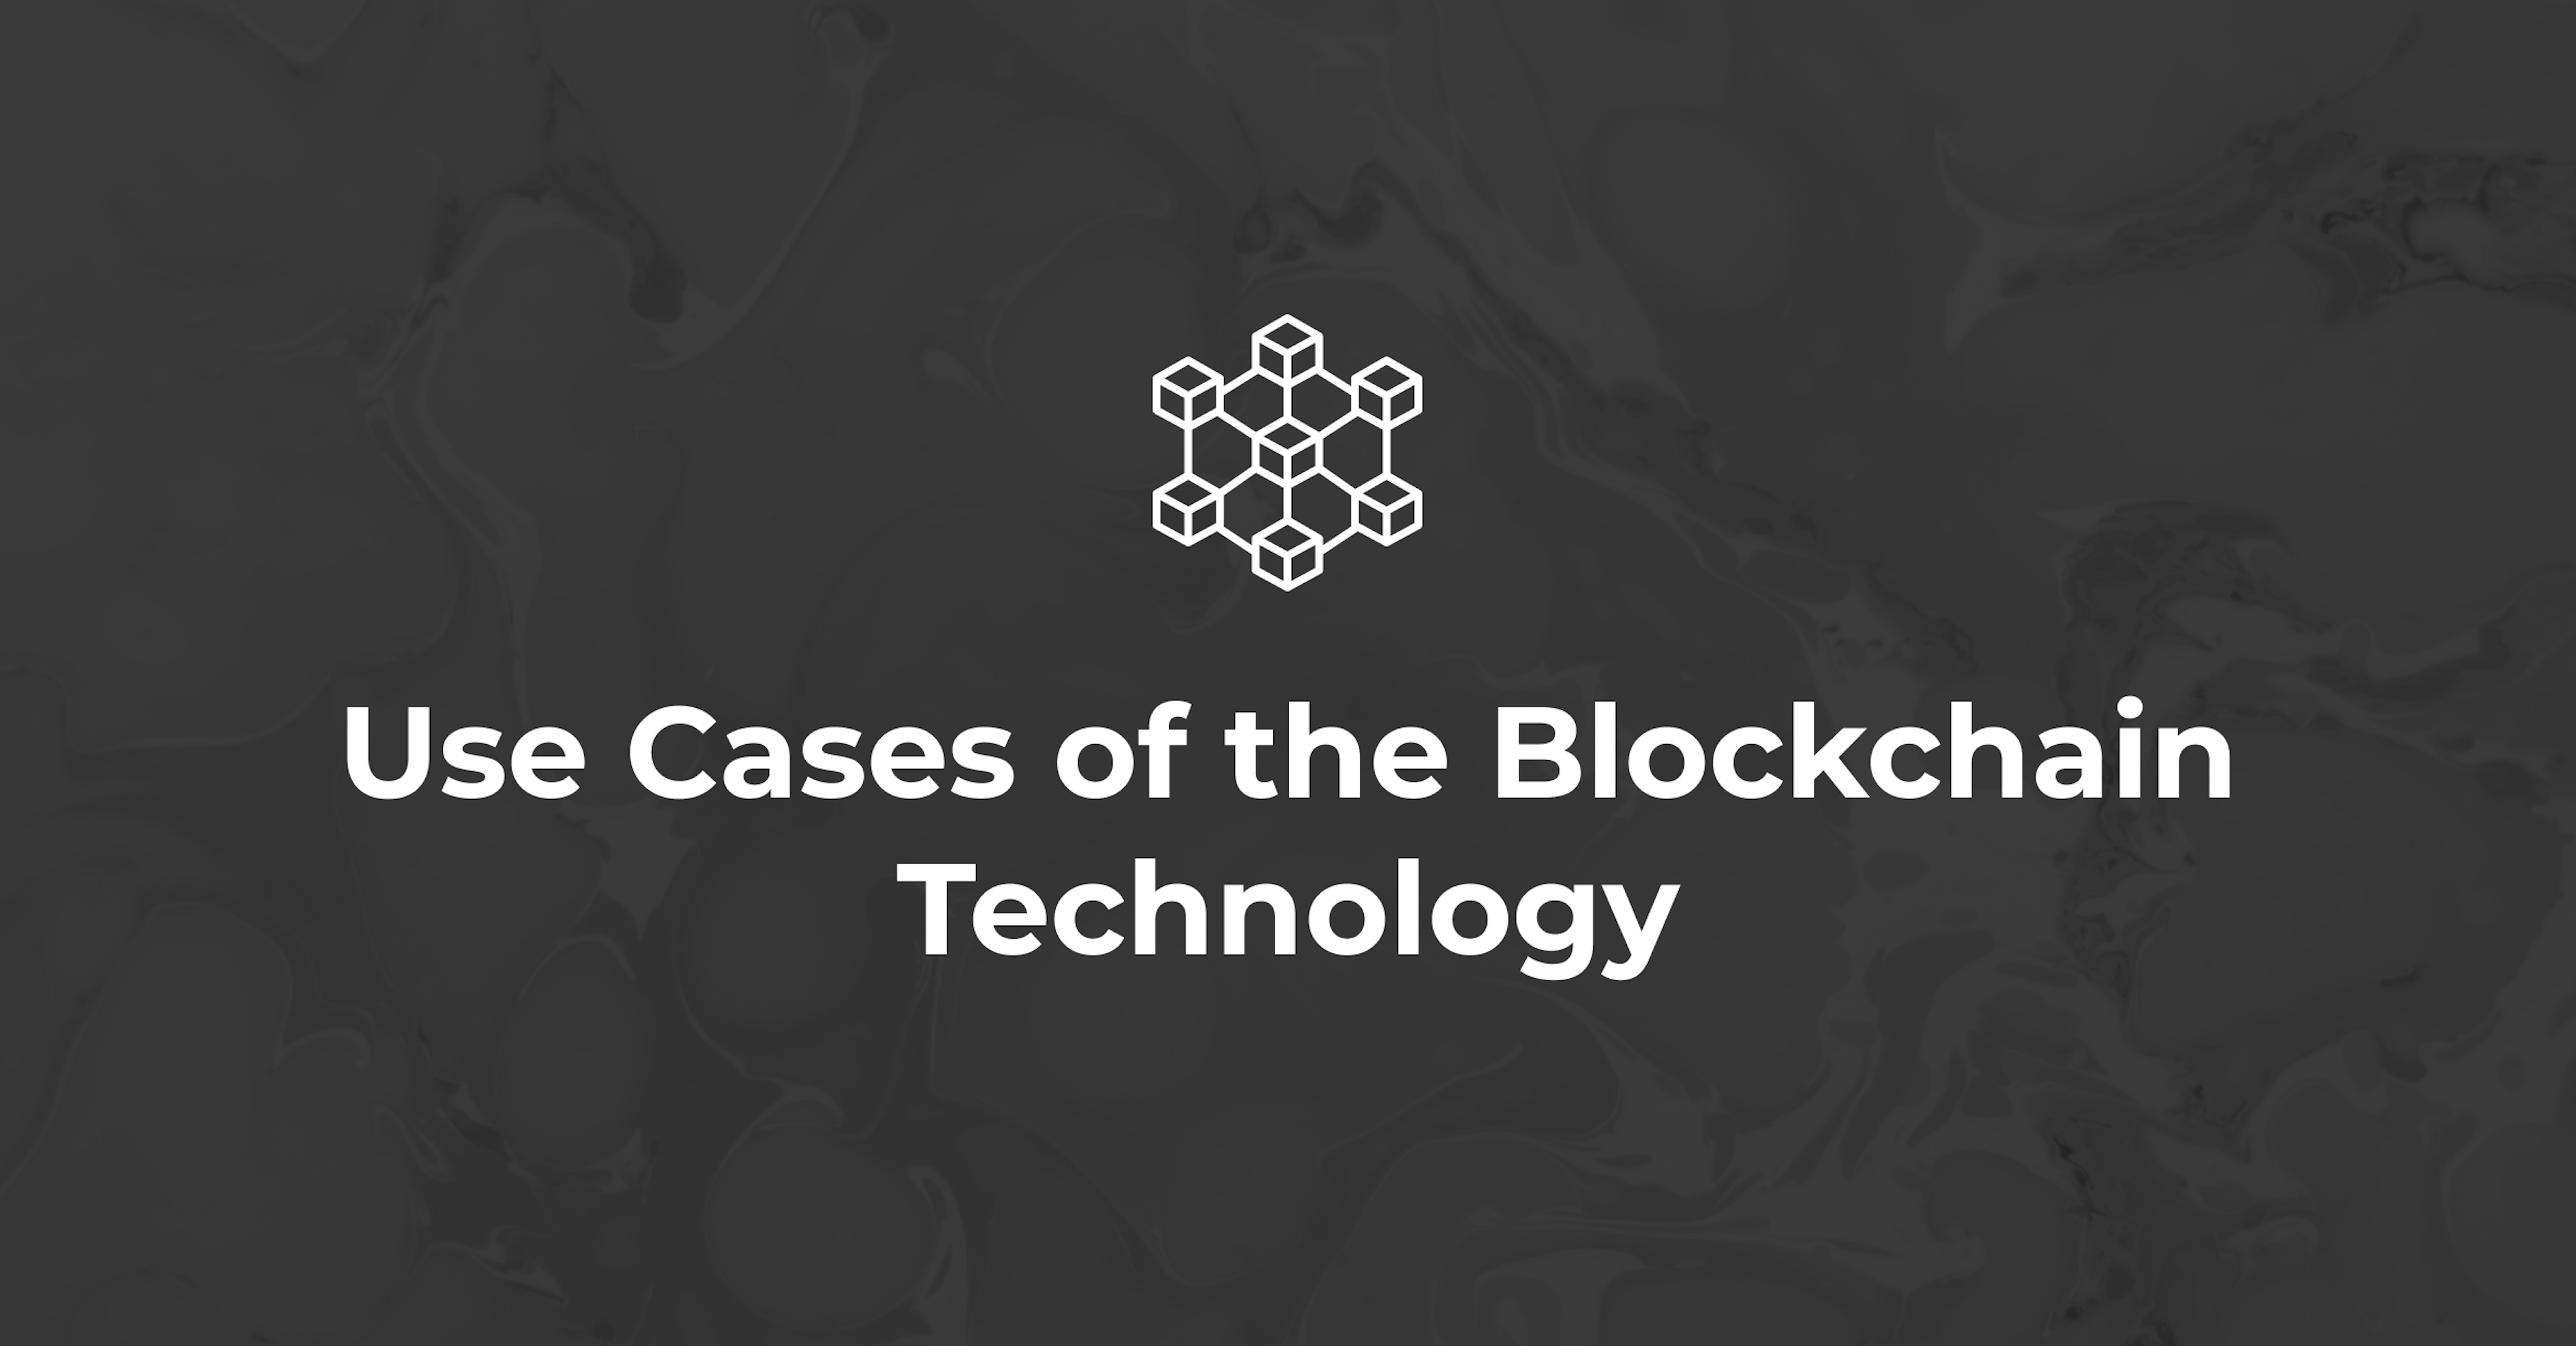 Use Cases of the Blockchain Technology